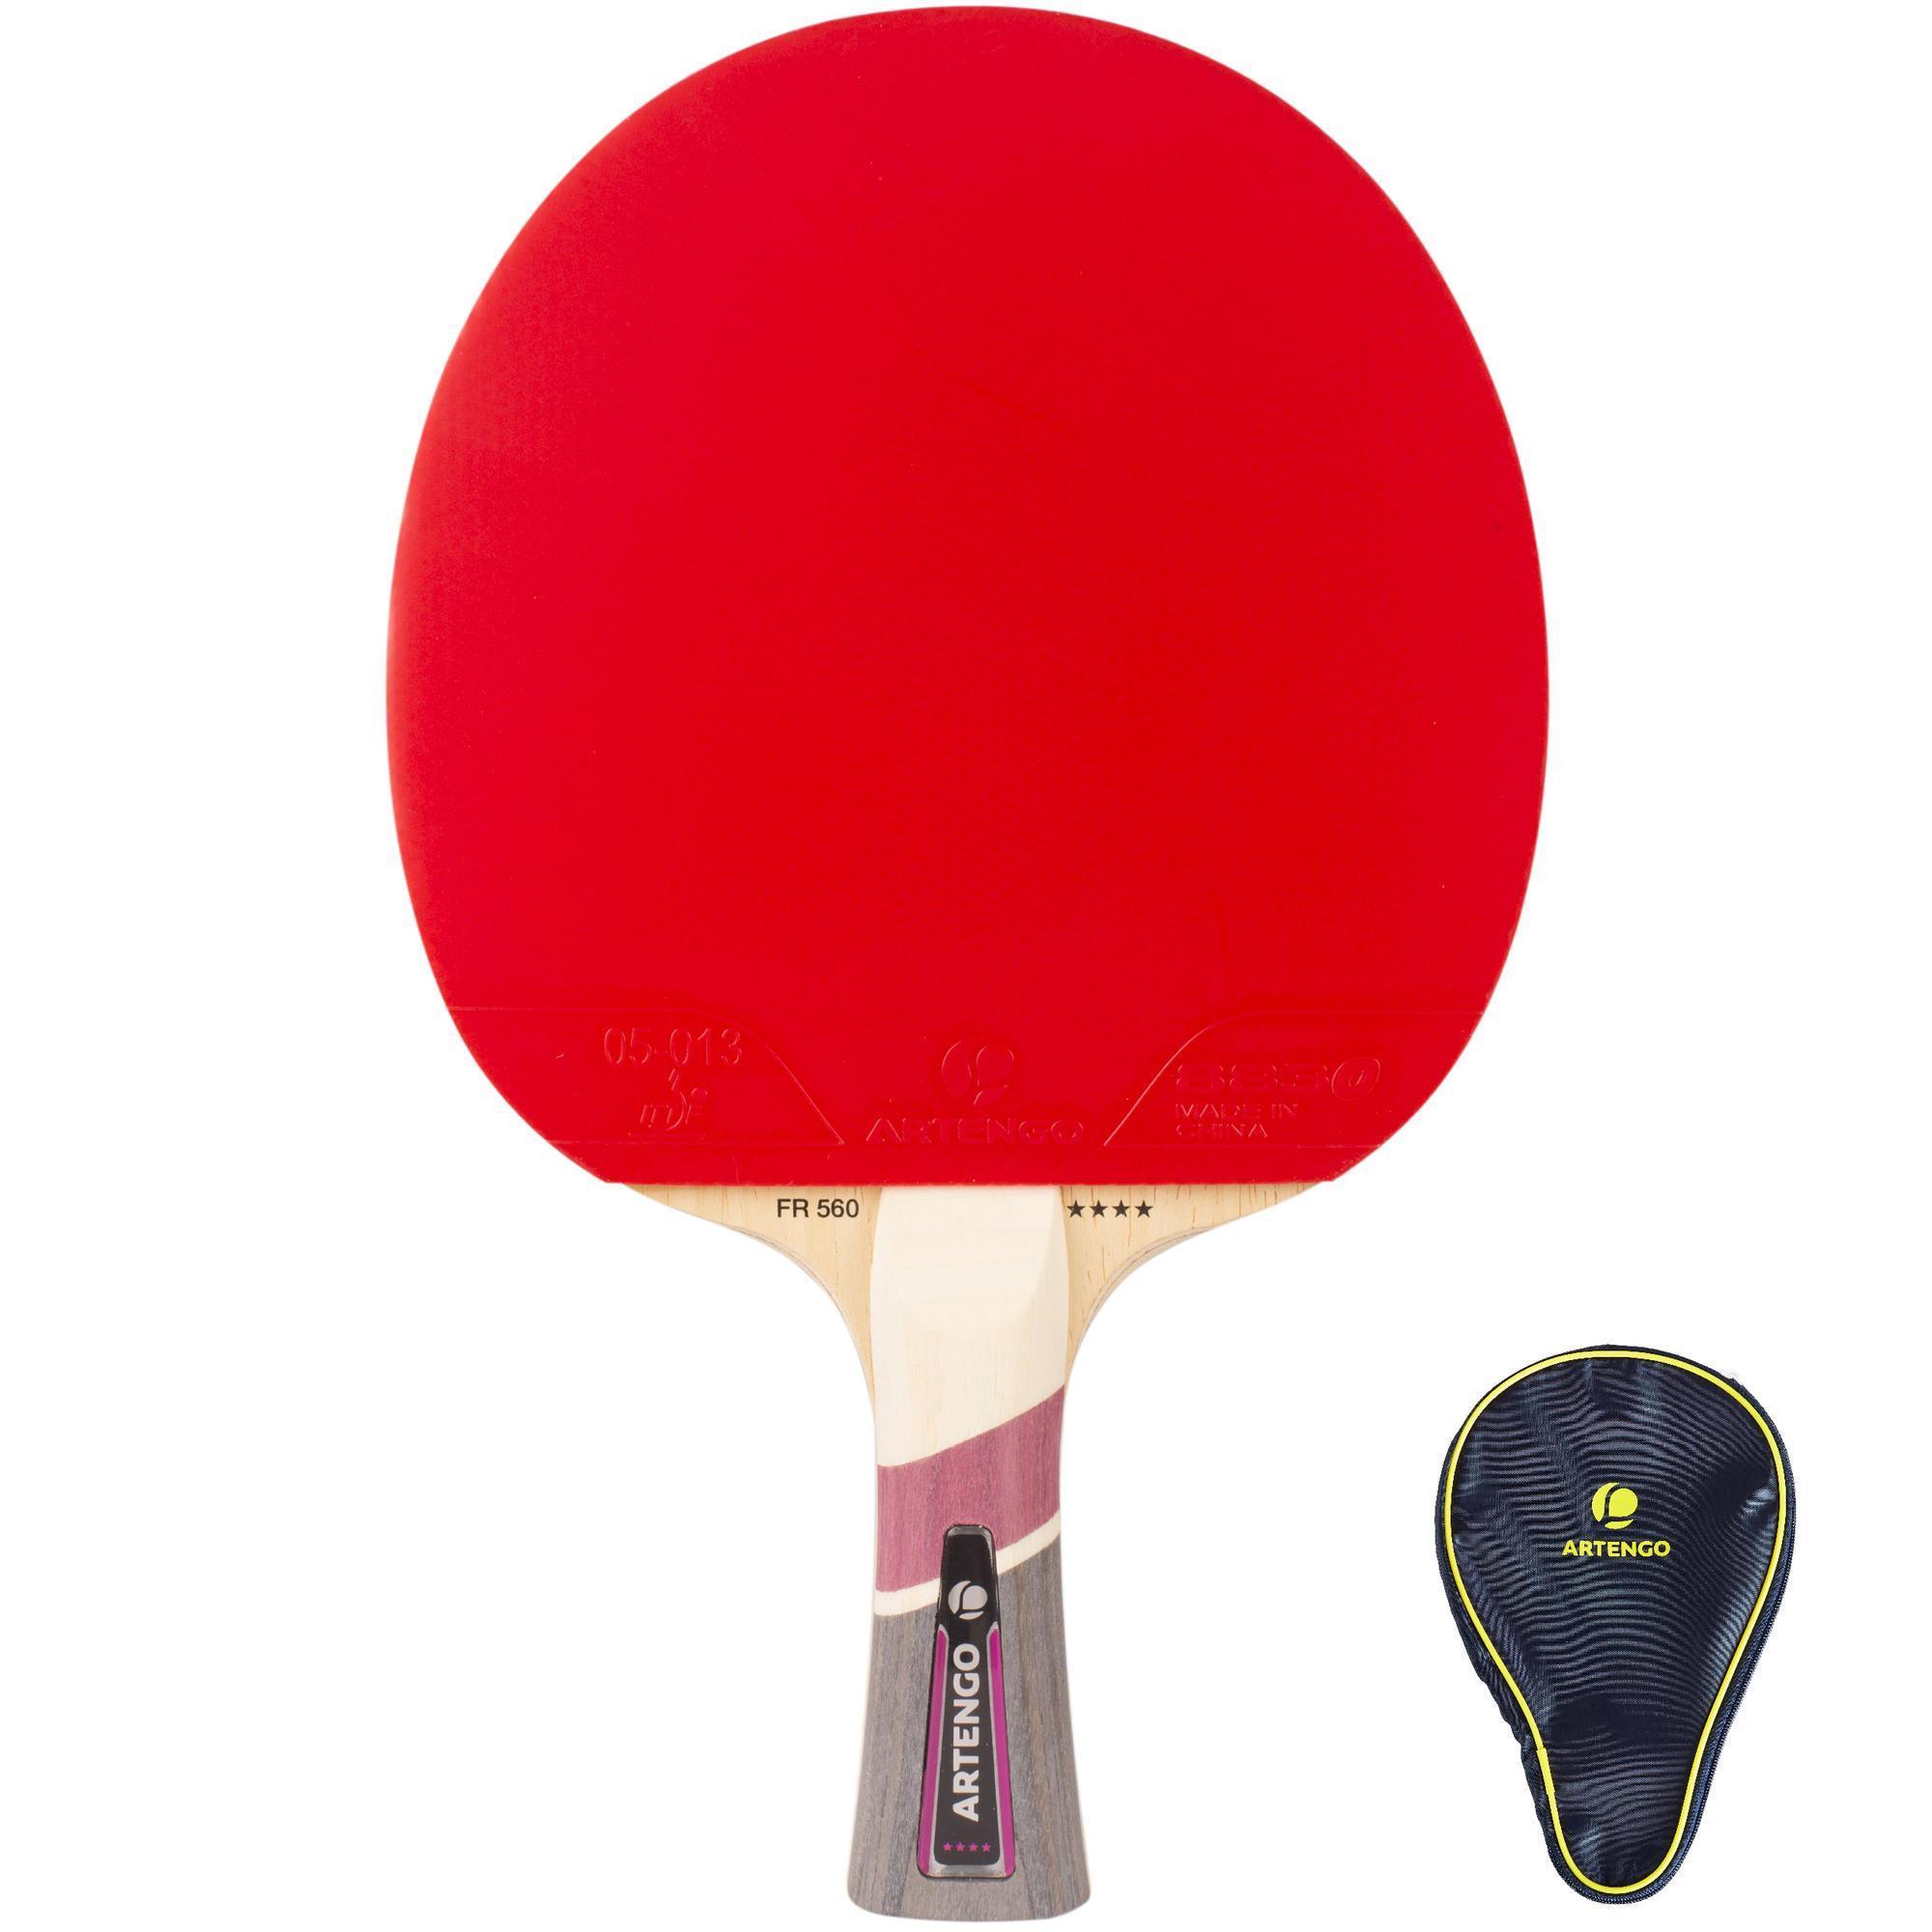 Fr 560 4 Set Of 2 Club And School Table Tennis Bats Cover